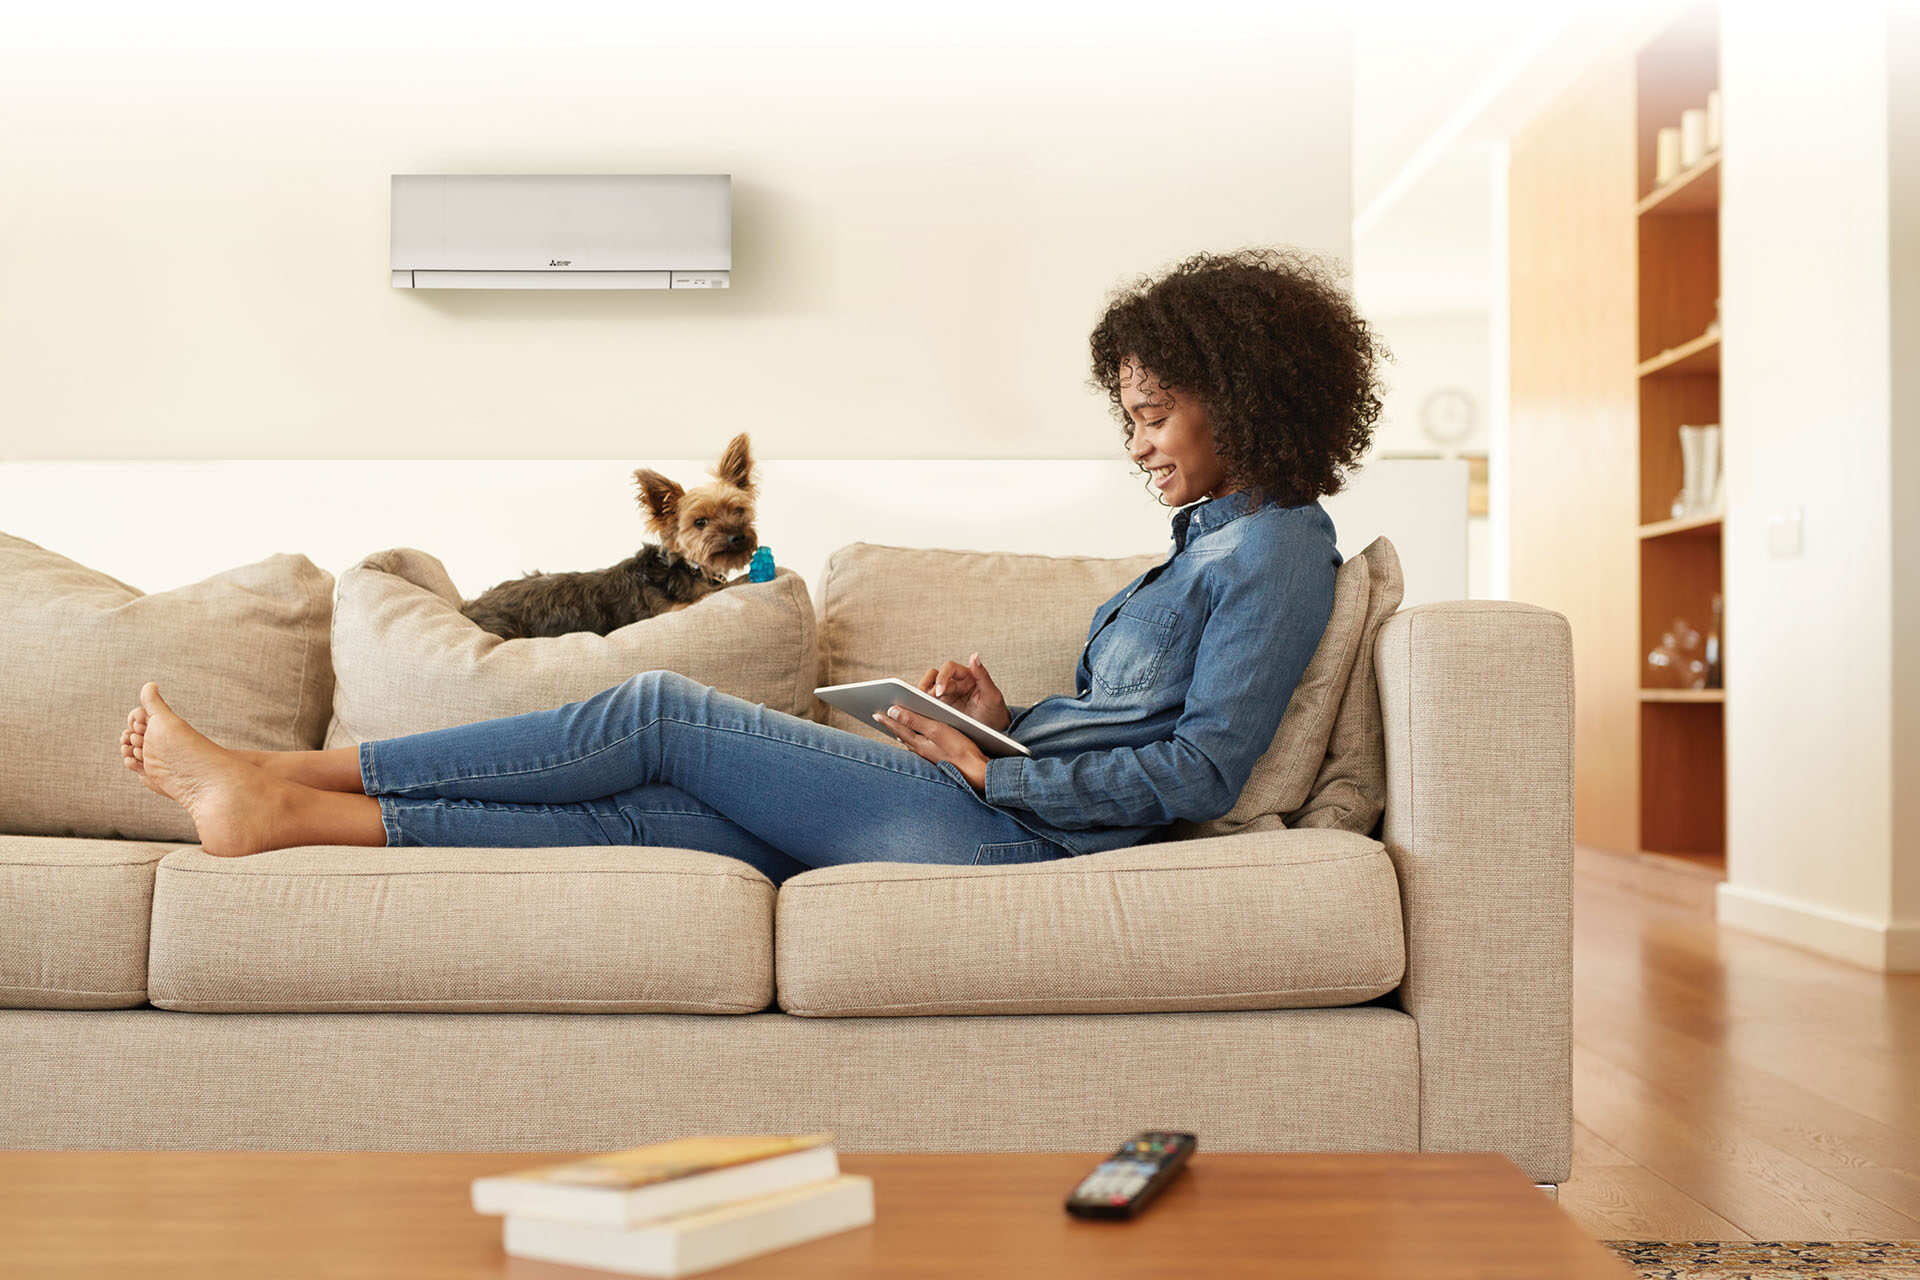 A woman sits on a sofa with her dog with a Mitsubishi ductless air conditioning and heating system on the wall behind them.